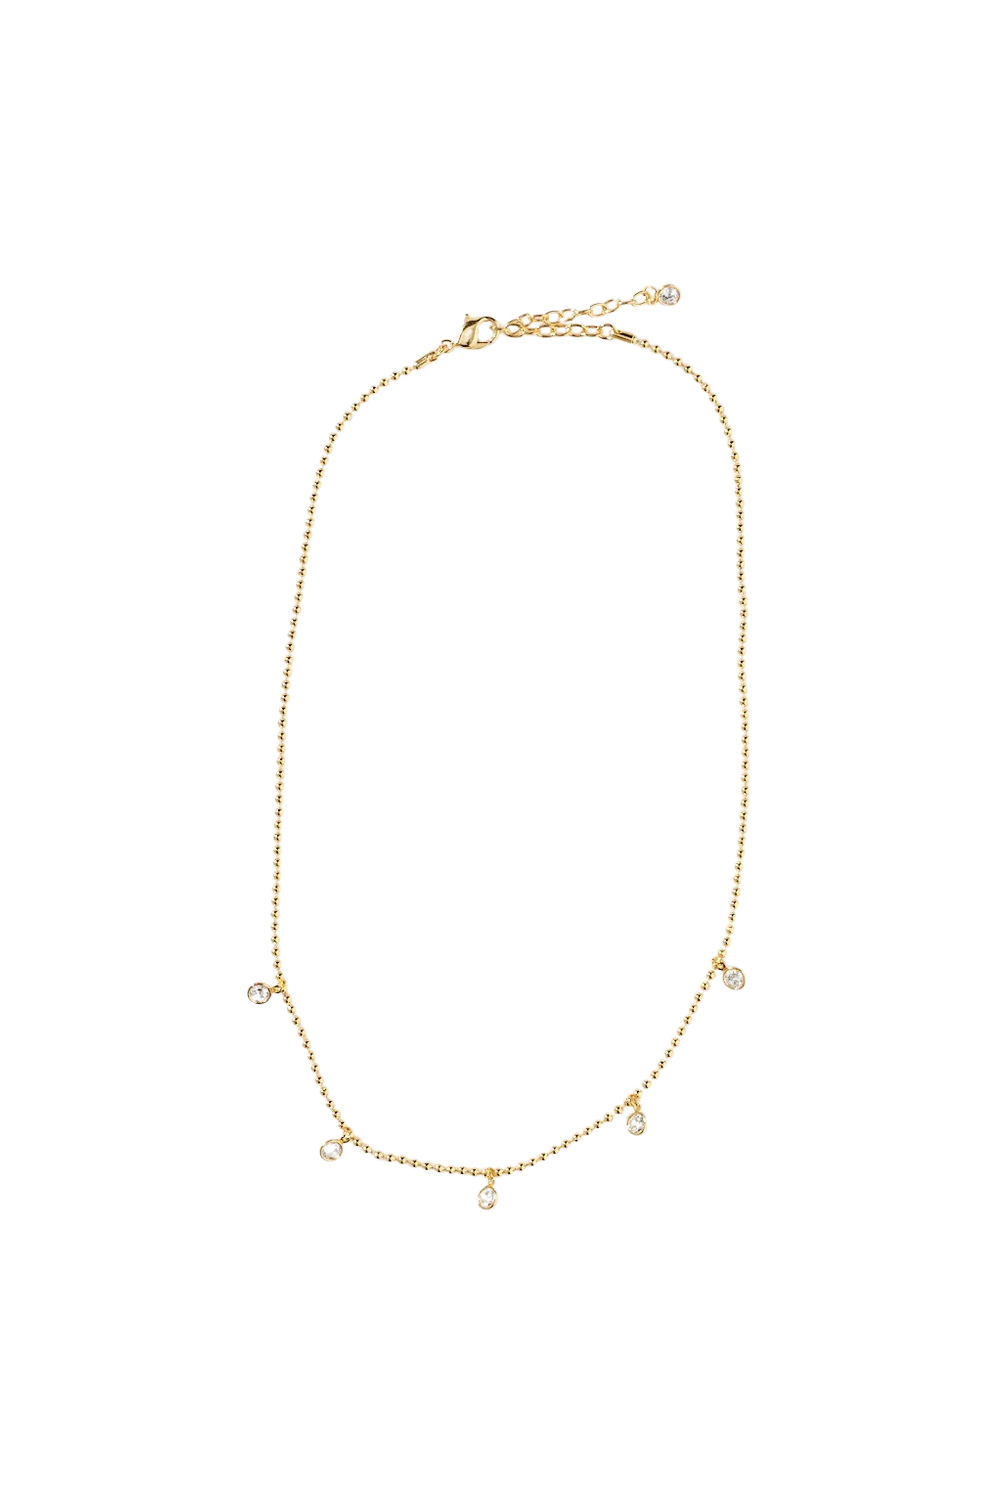 Steph Shaker Necklace - Cubic Zirconia